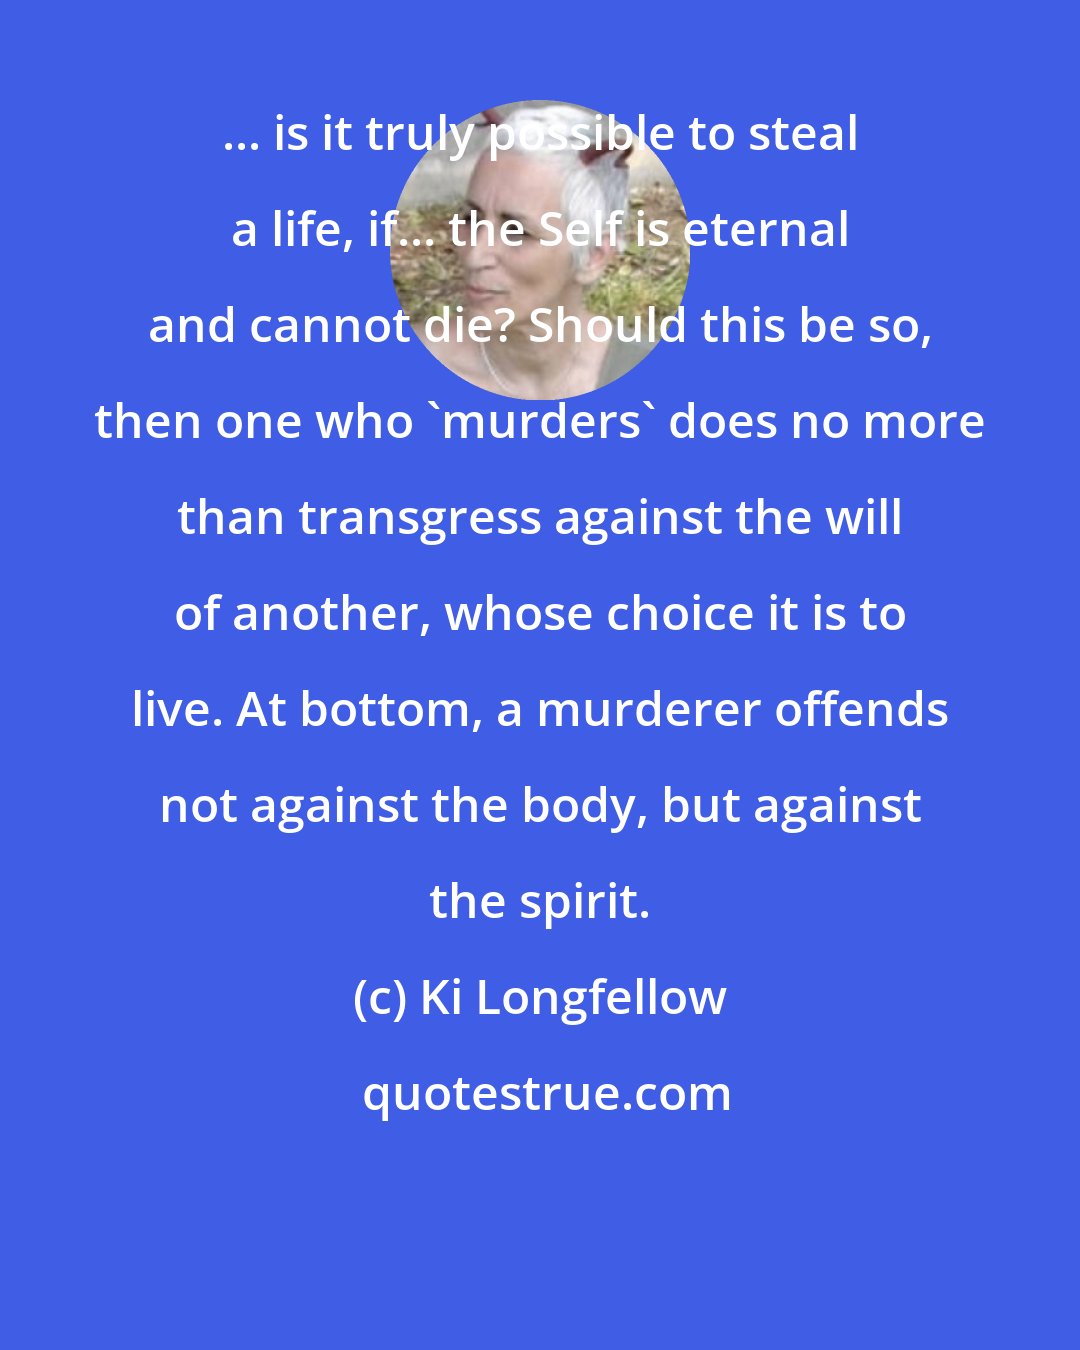 Ki Longfellow: ... is it truly possible to steal a life, if... the Self is eternal and cannot die? Should this be so, then one who 'murders' does no more than transgress against the will of another, whose choice it is to live. At bottom, a murderer offends not against the body, but against the spirit.